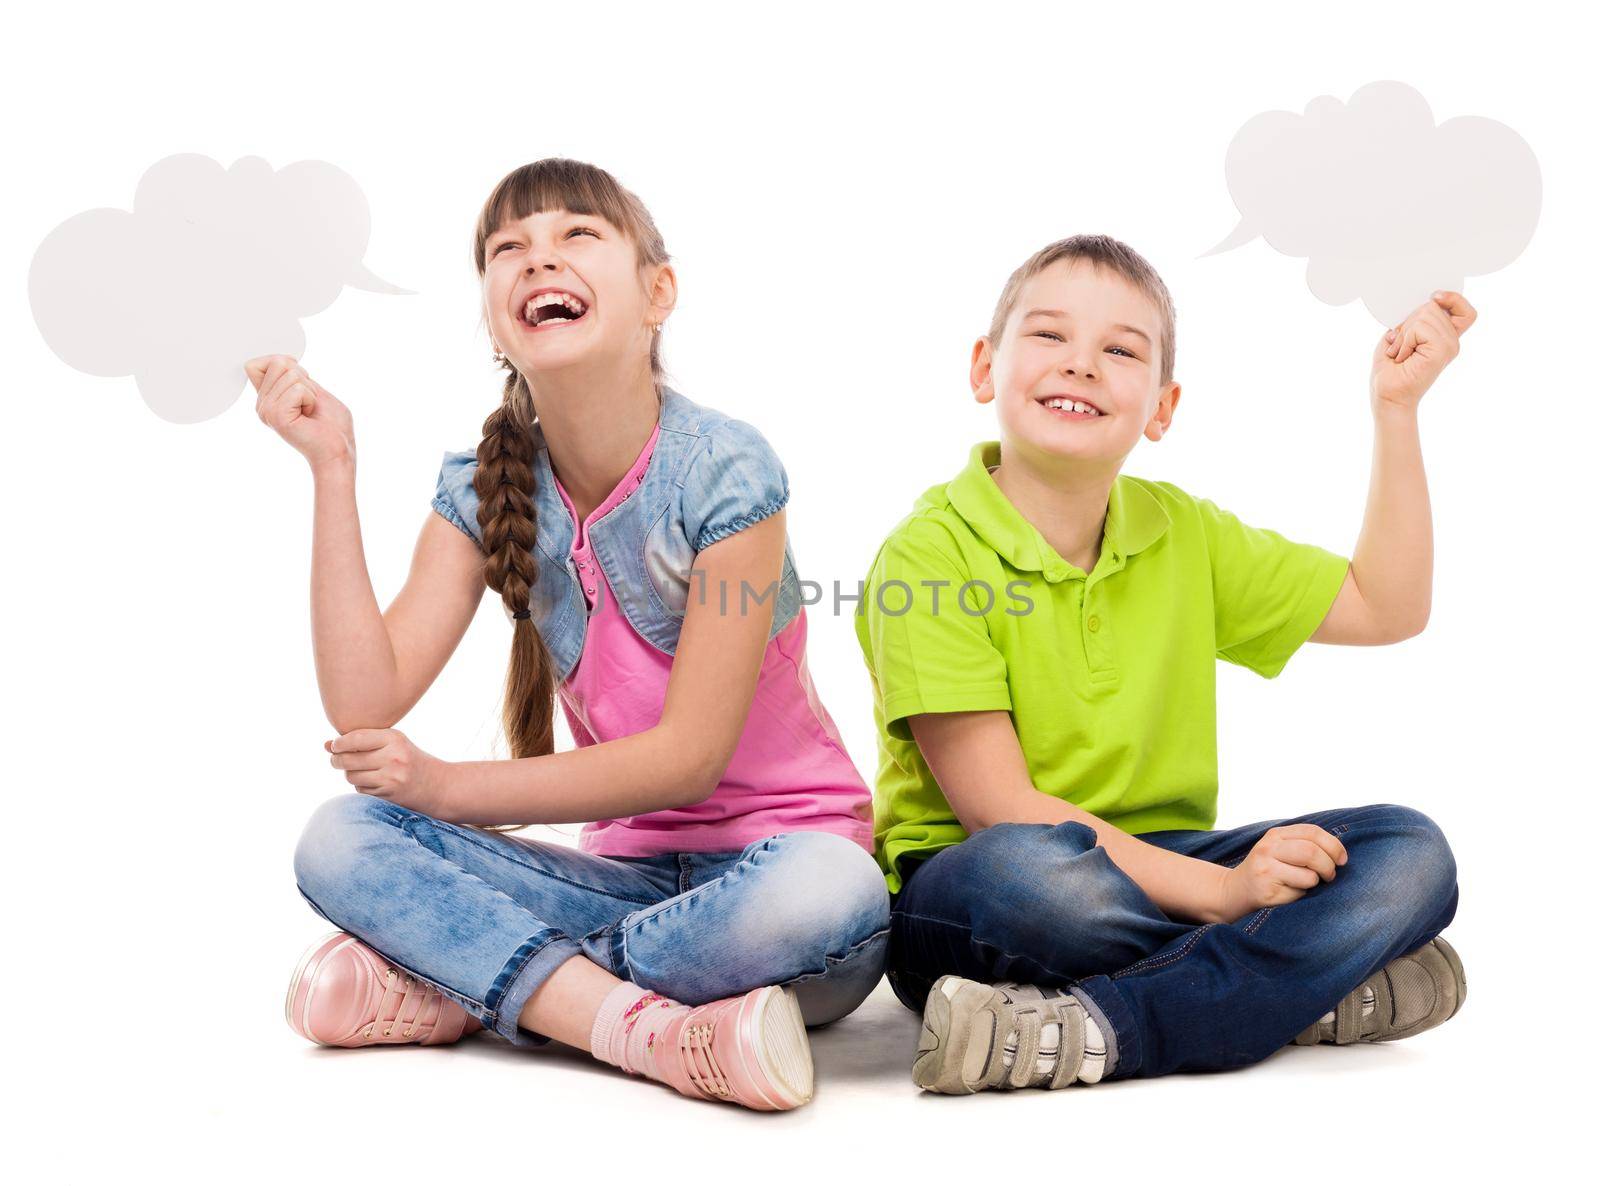 two funny children sitting on the floor with paper clouds in hands laughing isolated on white background